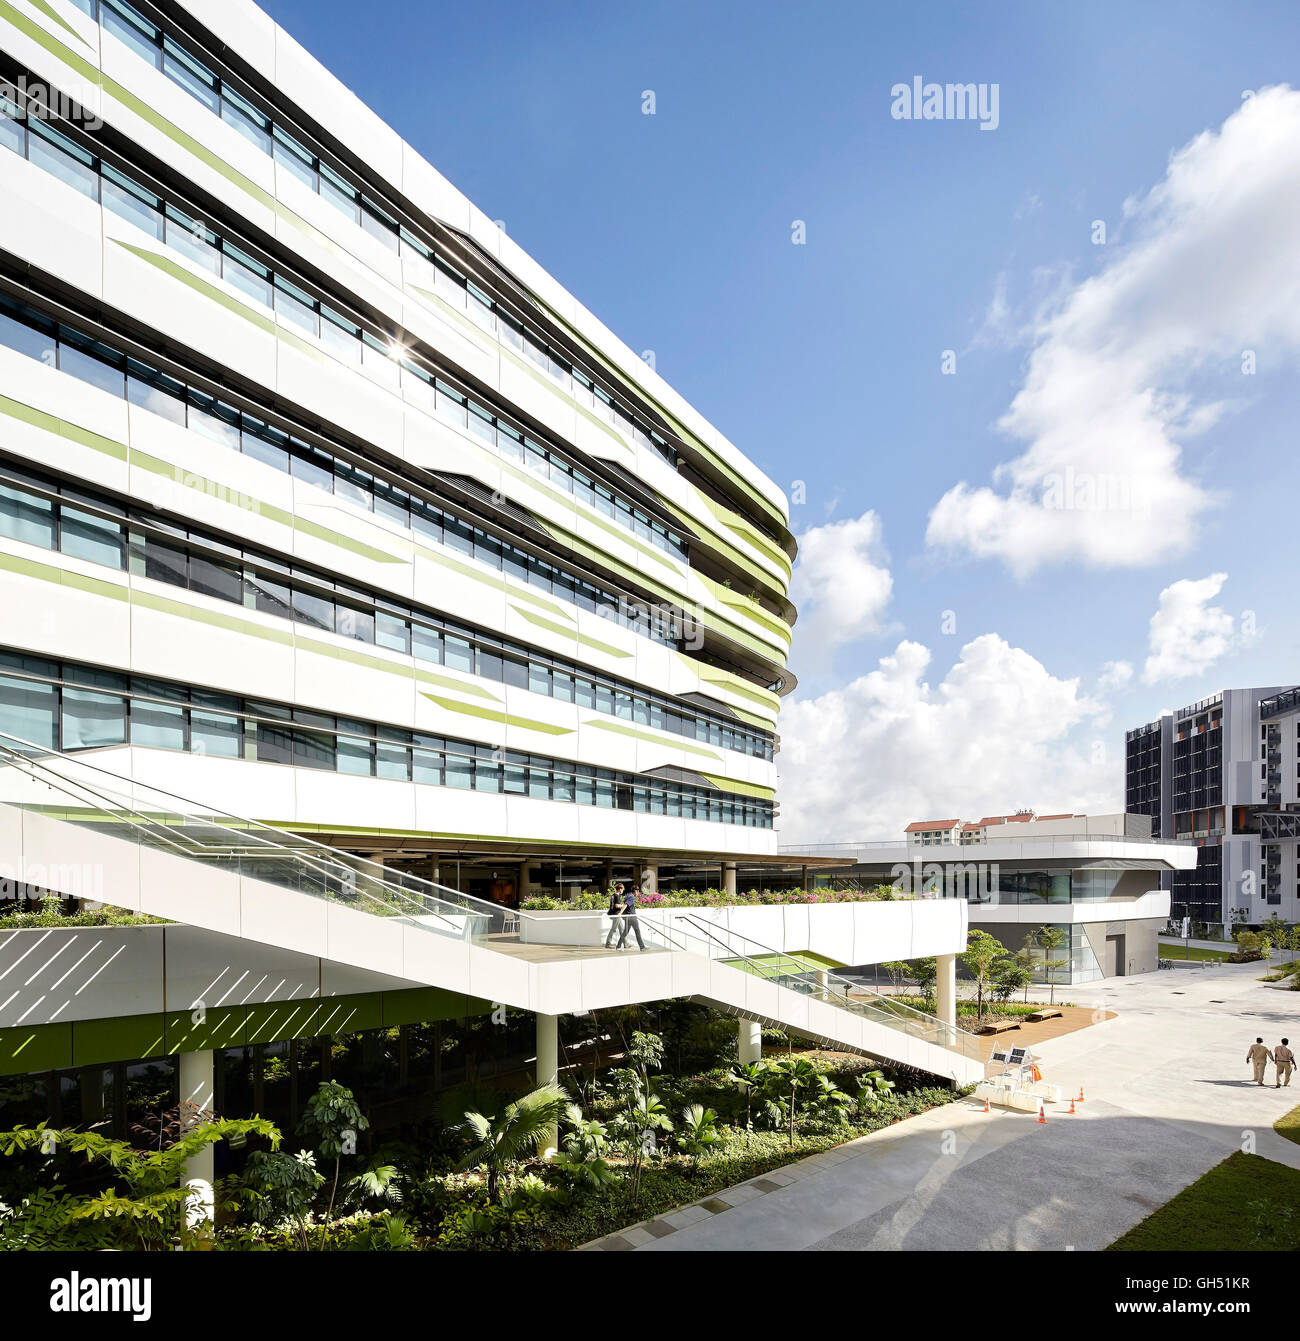 Facade perspective with staircase links. Singapore University of Technology and Design, Singapore, Singapore. Architect: UNStudio, 2015. Stock Photo